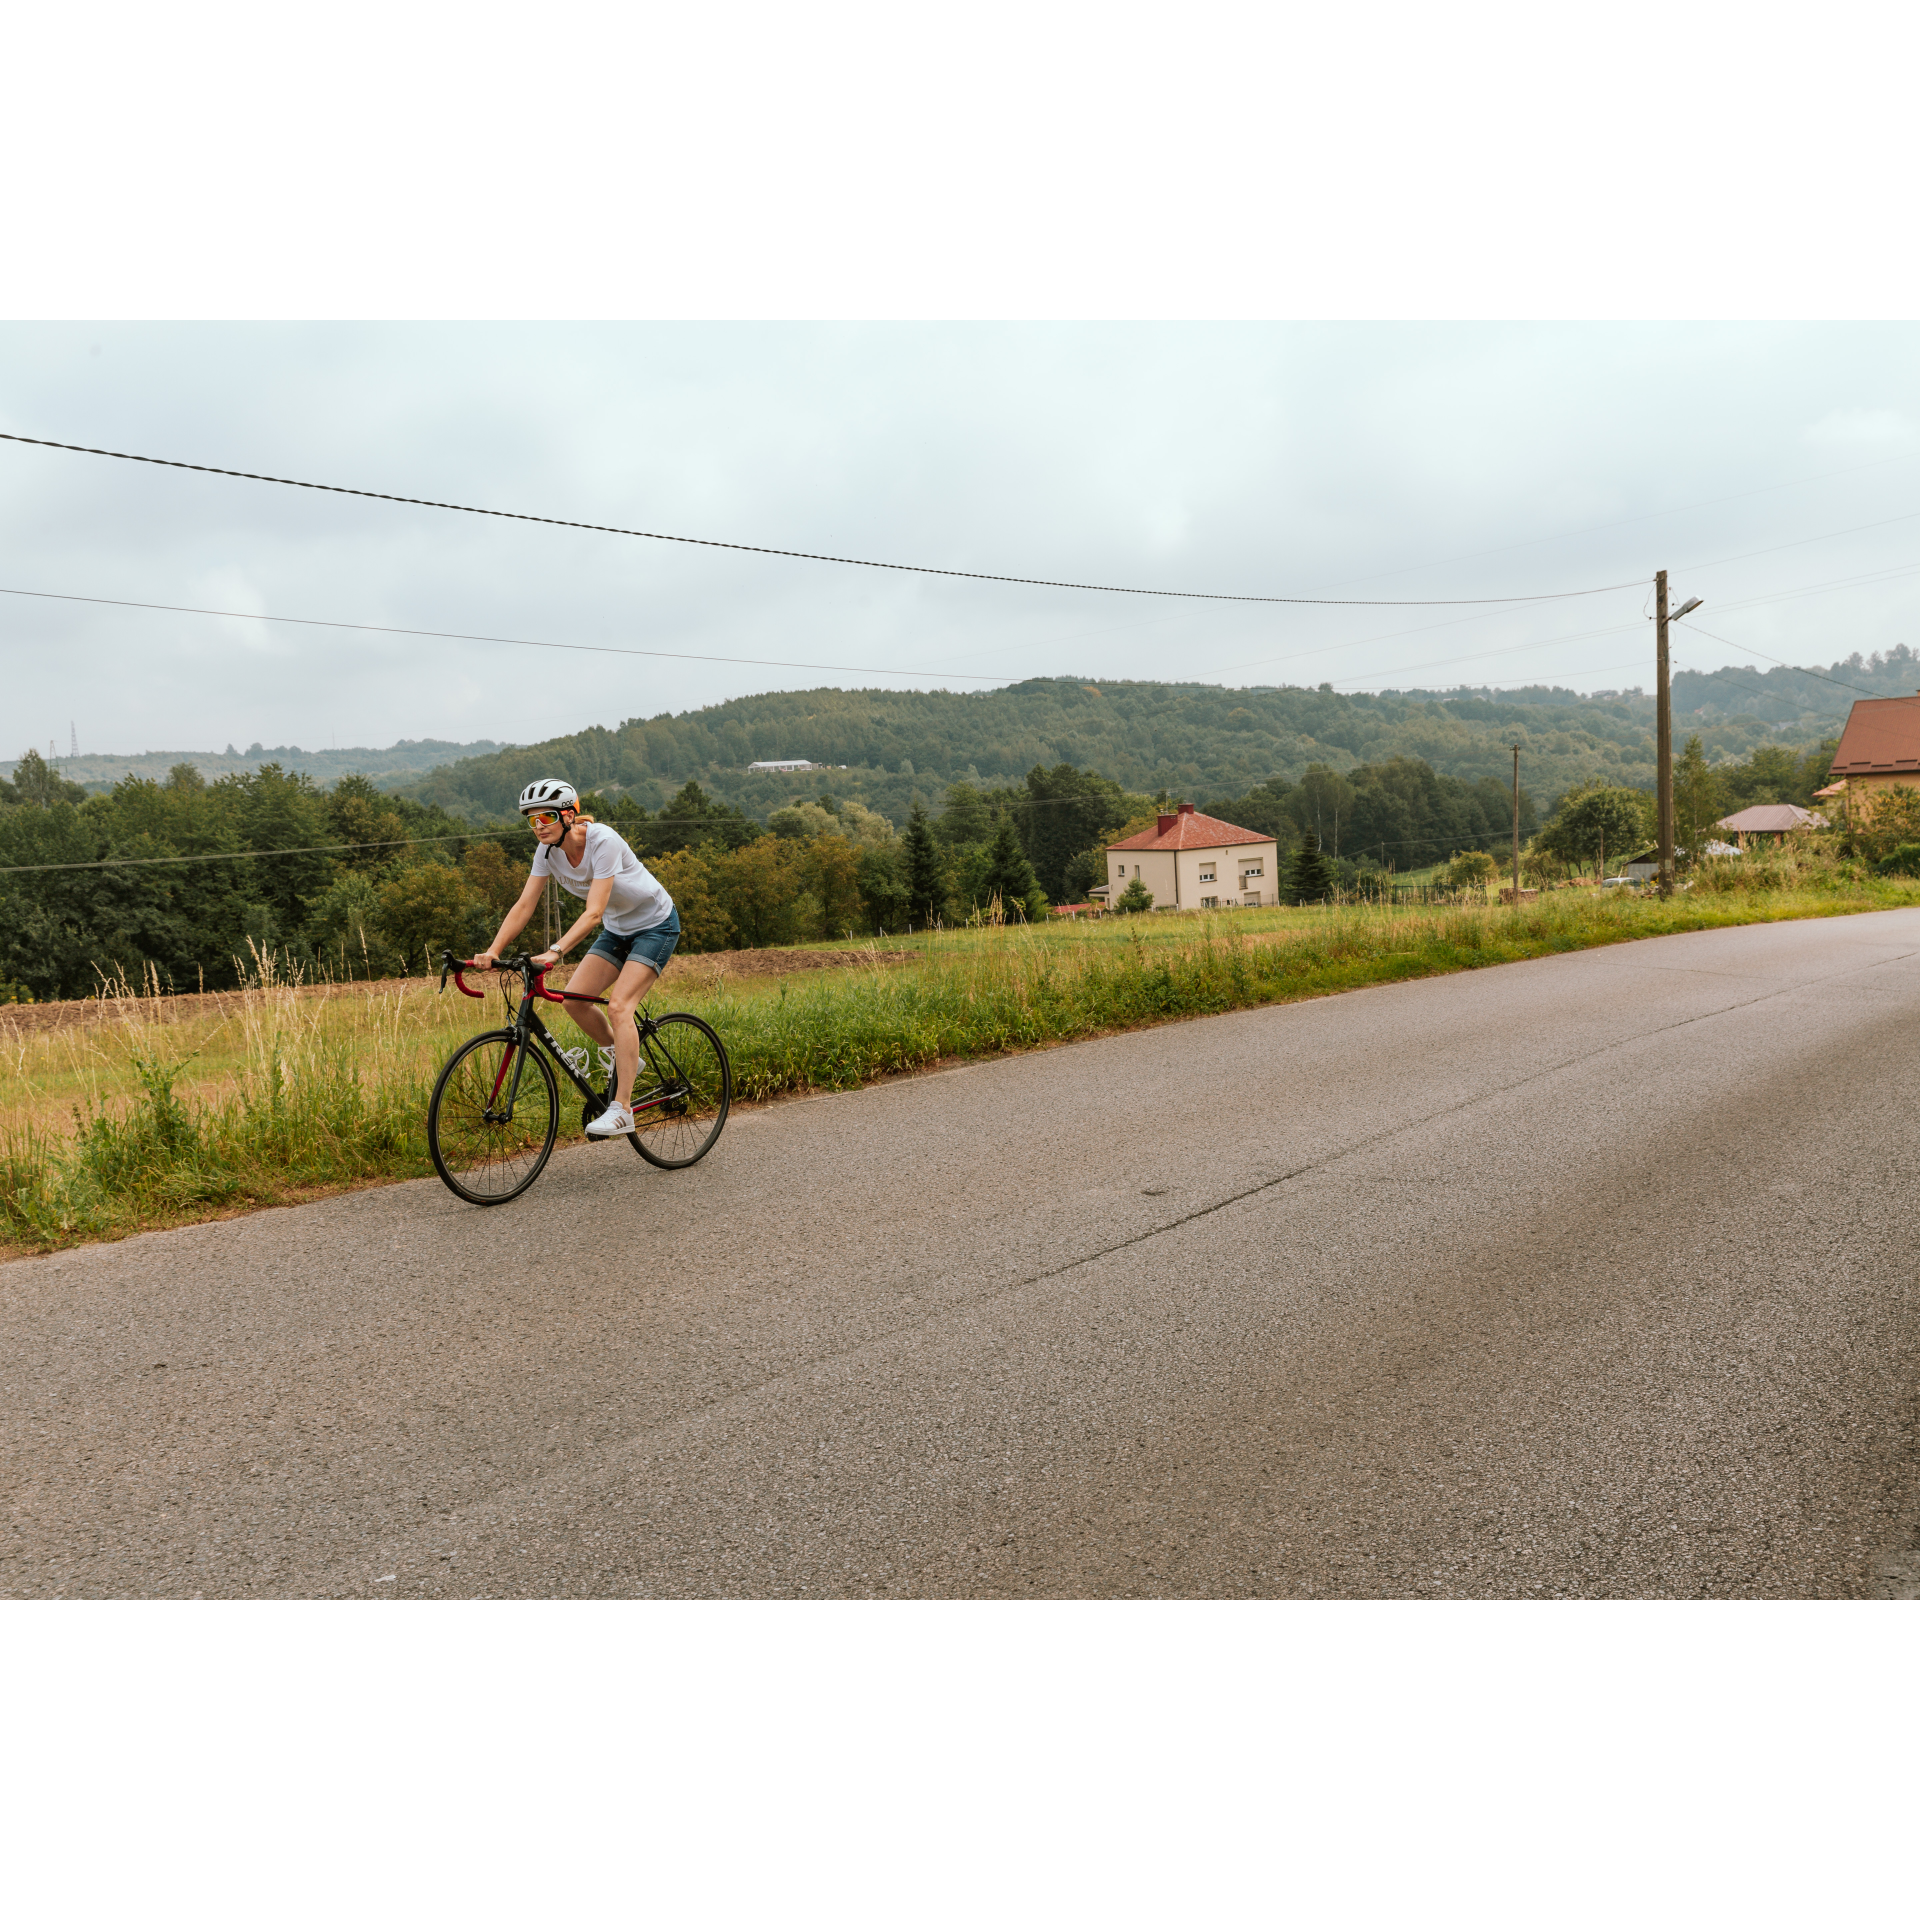 A cyclist and hills and houses in the background